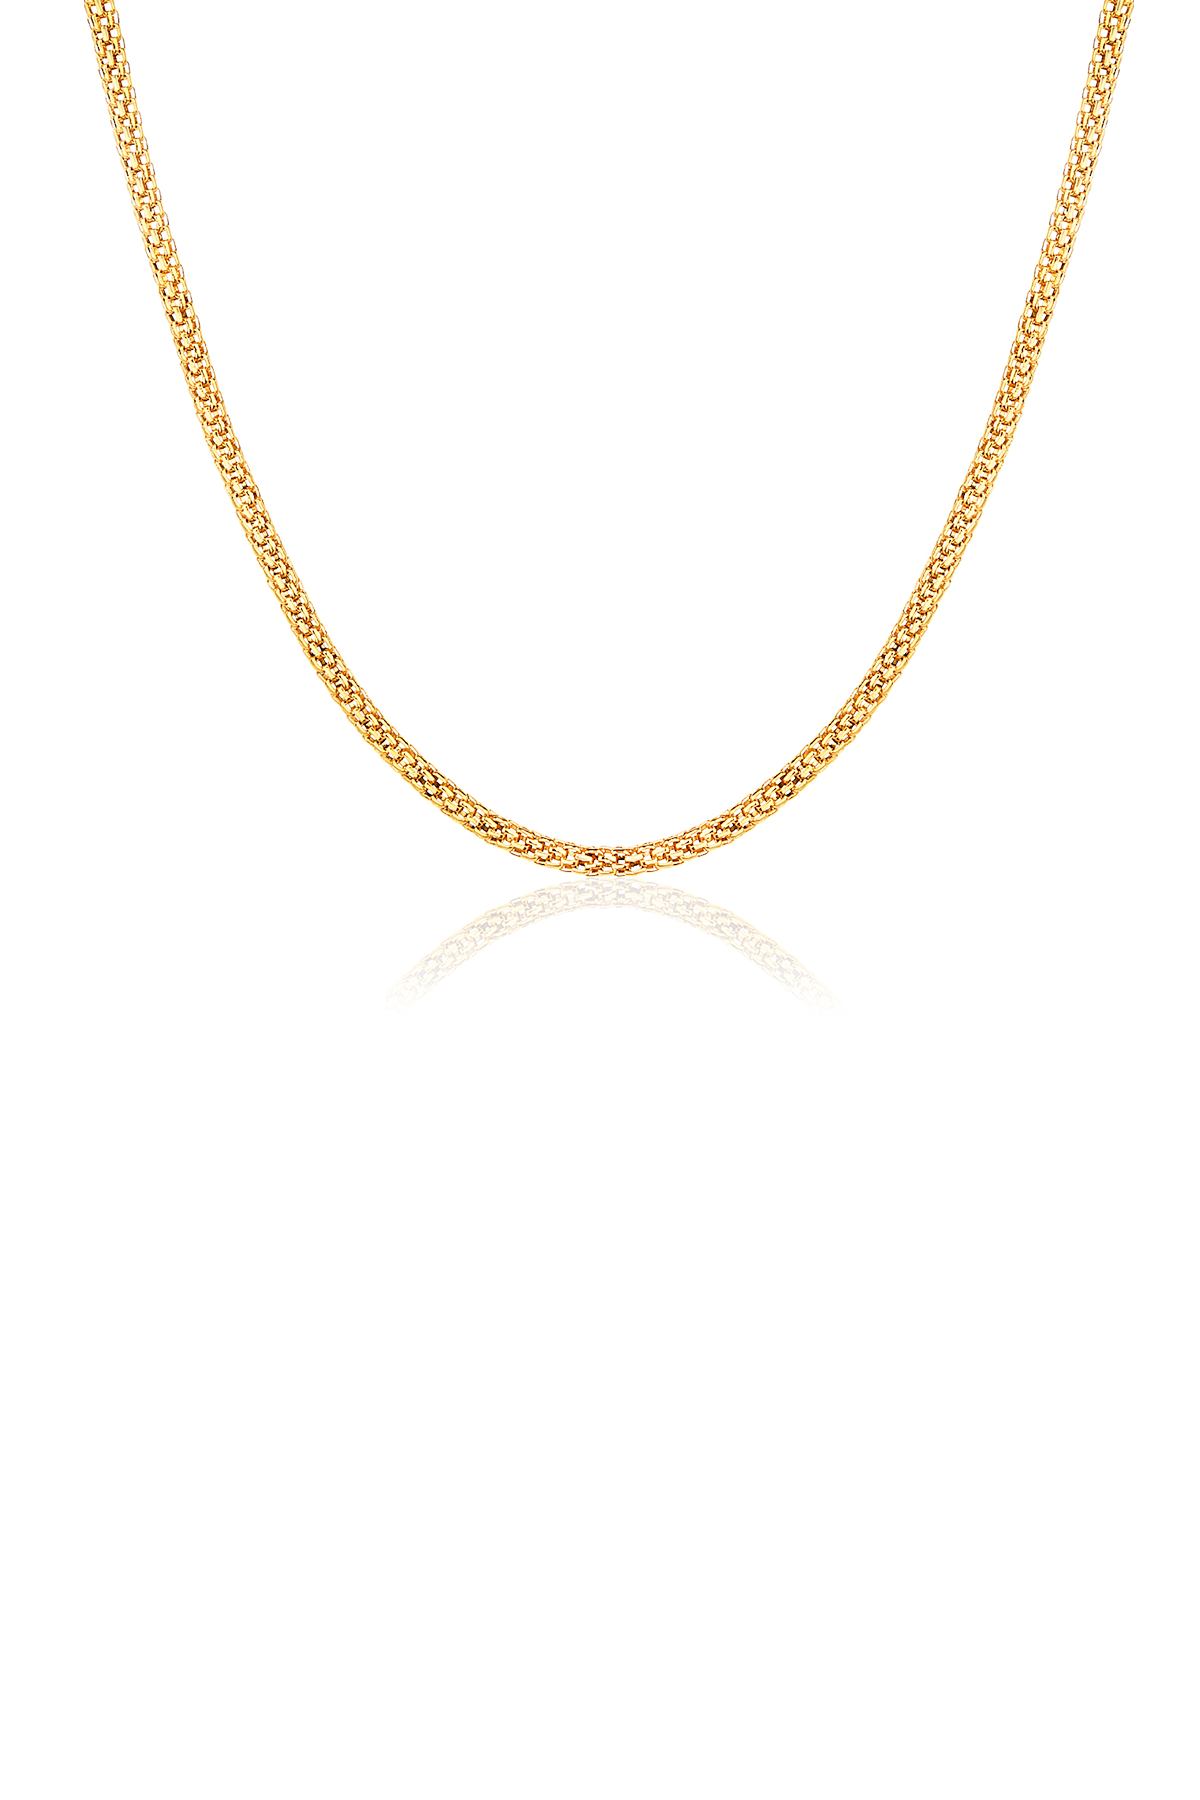 Cable necklace, gold - 3 mm